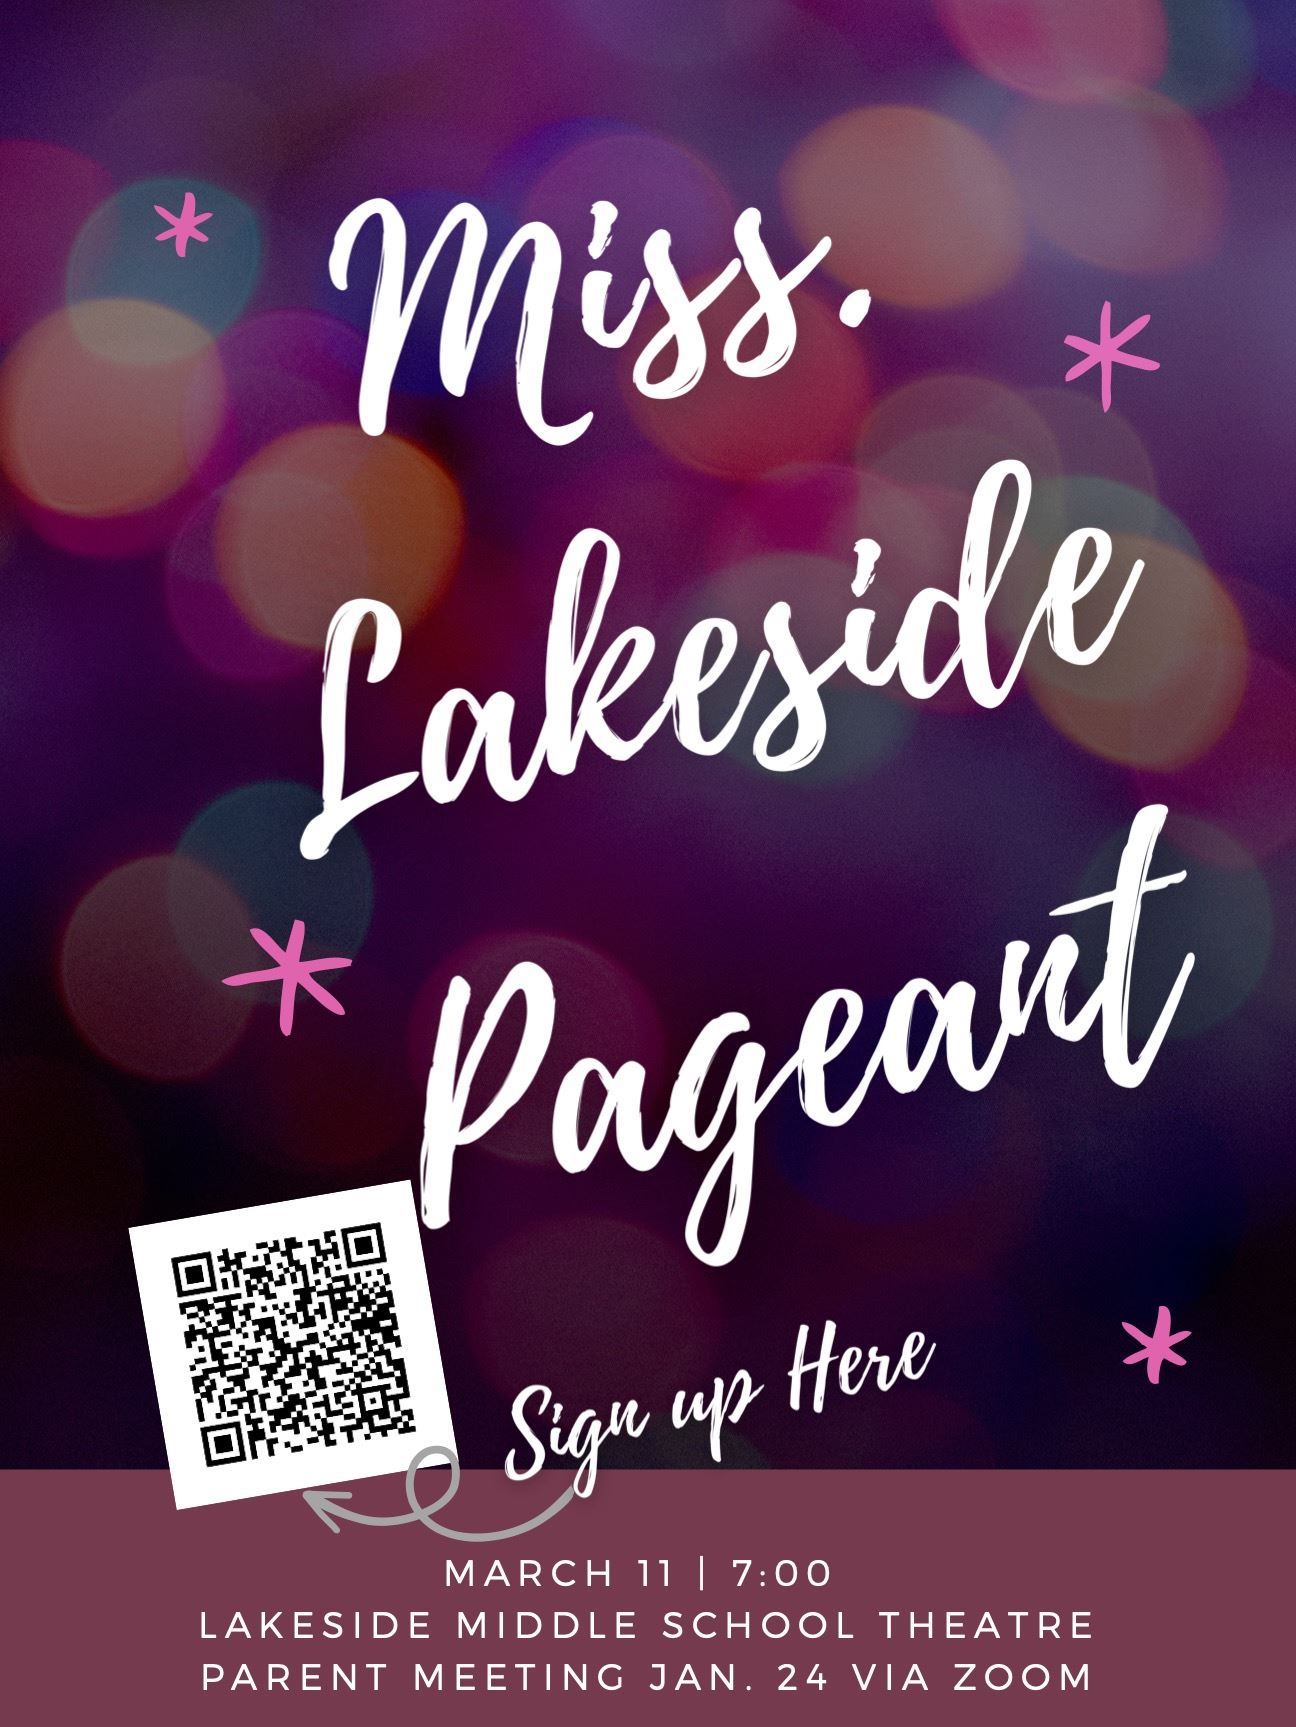  Miss Lakeside Pageant